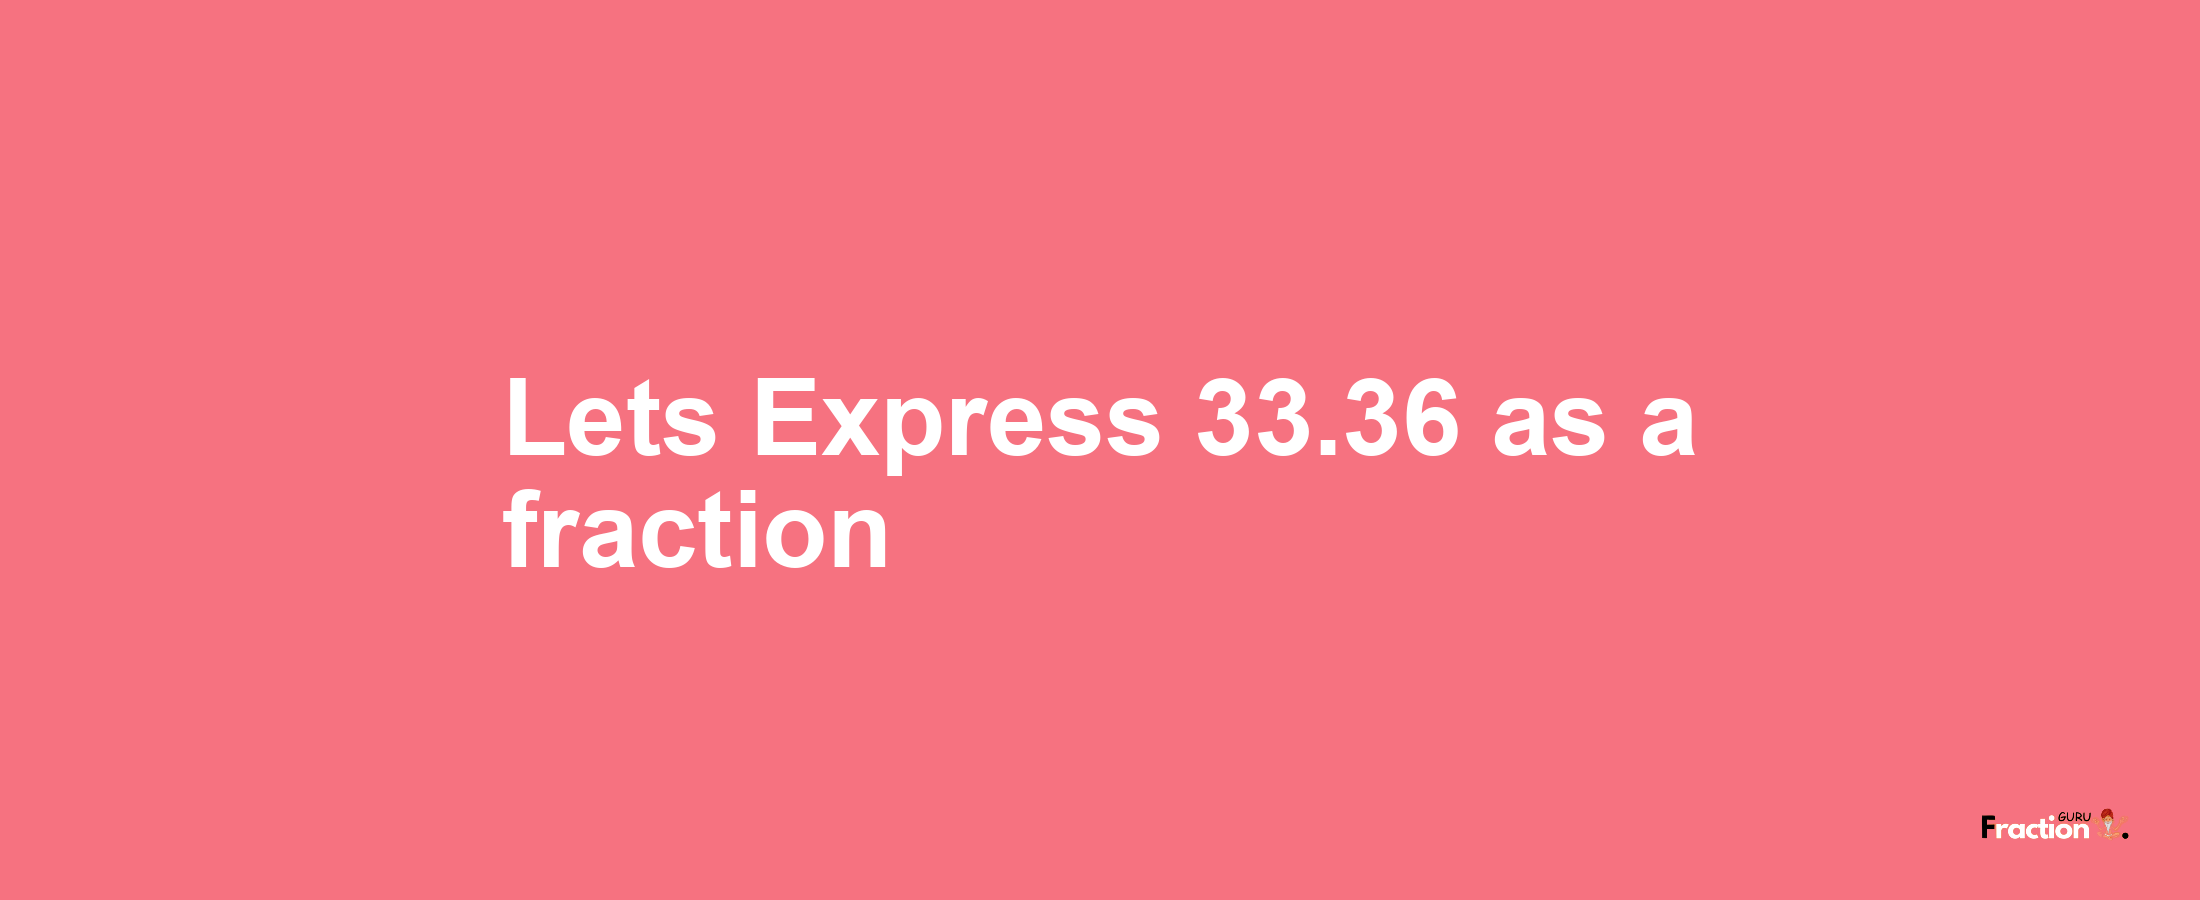 Lets Express 33.36 as afraction